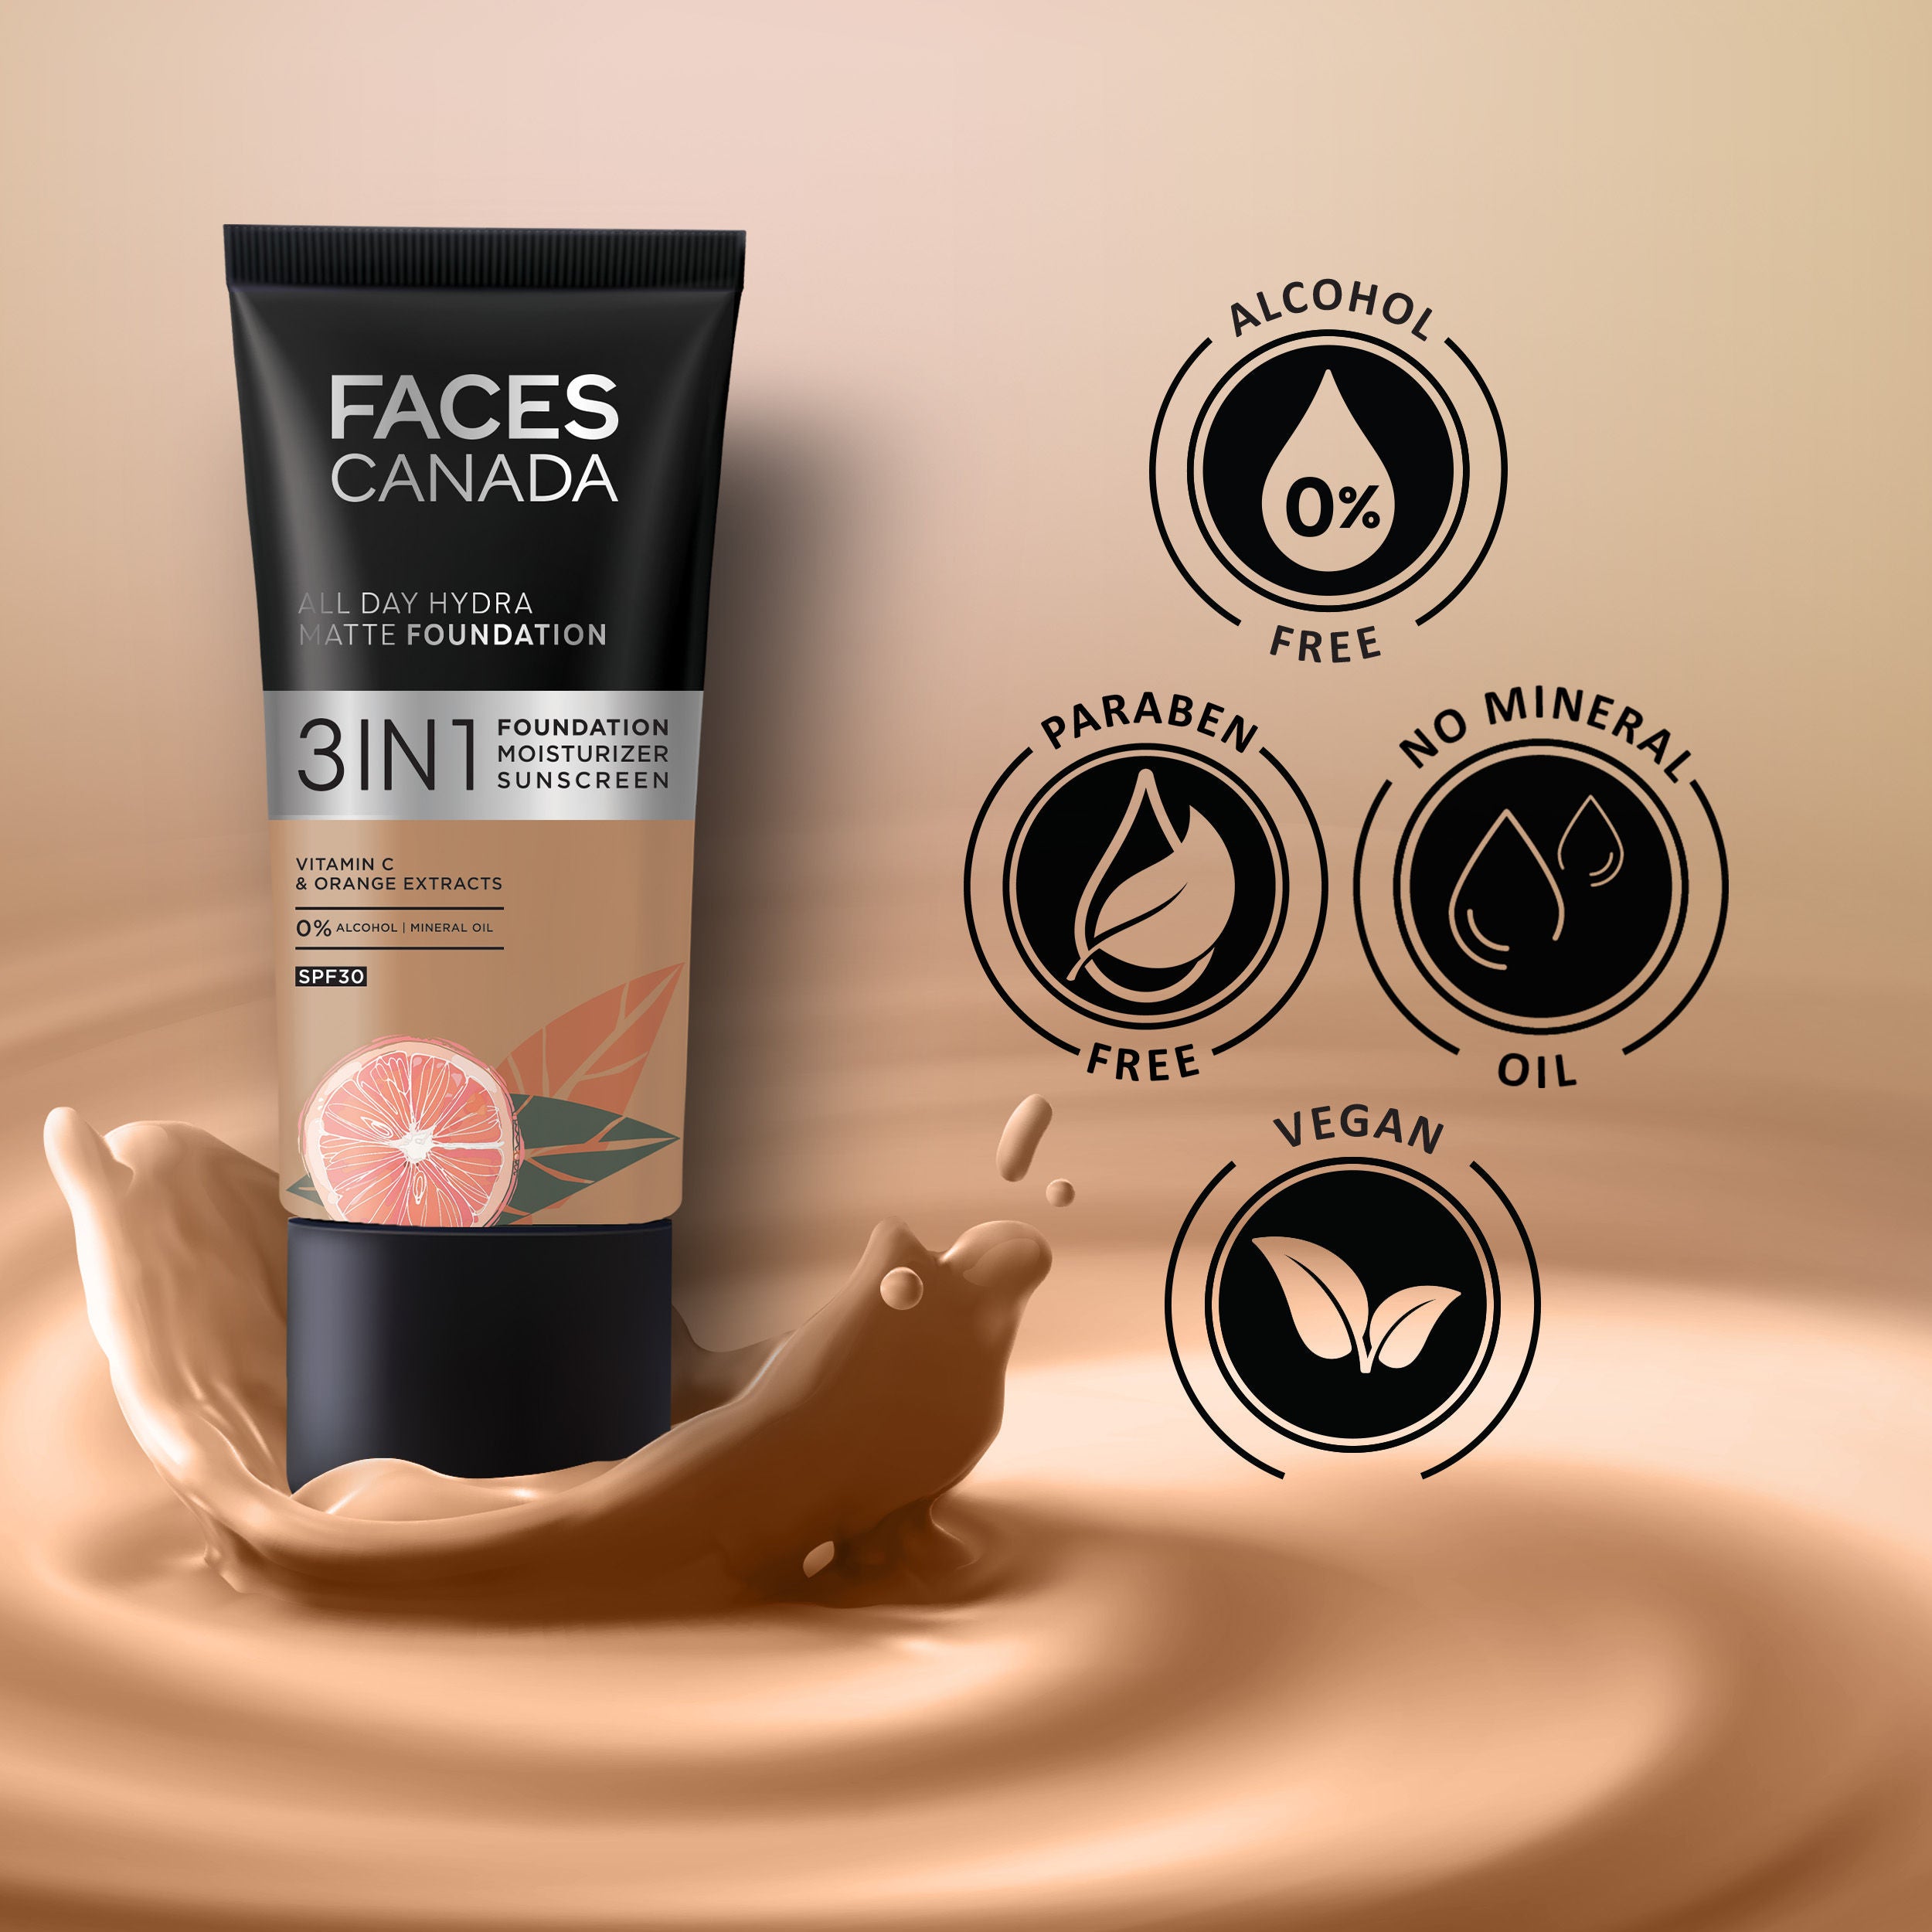 Faces Canada 3 In 1 All Day Hydra Matte Foundation - Golden Beige 032 (25ml) Faces Canada